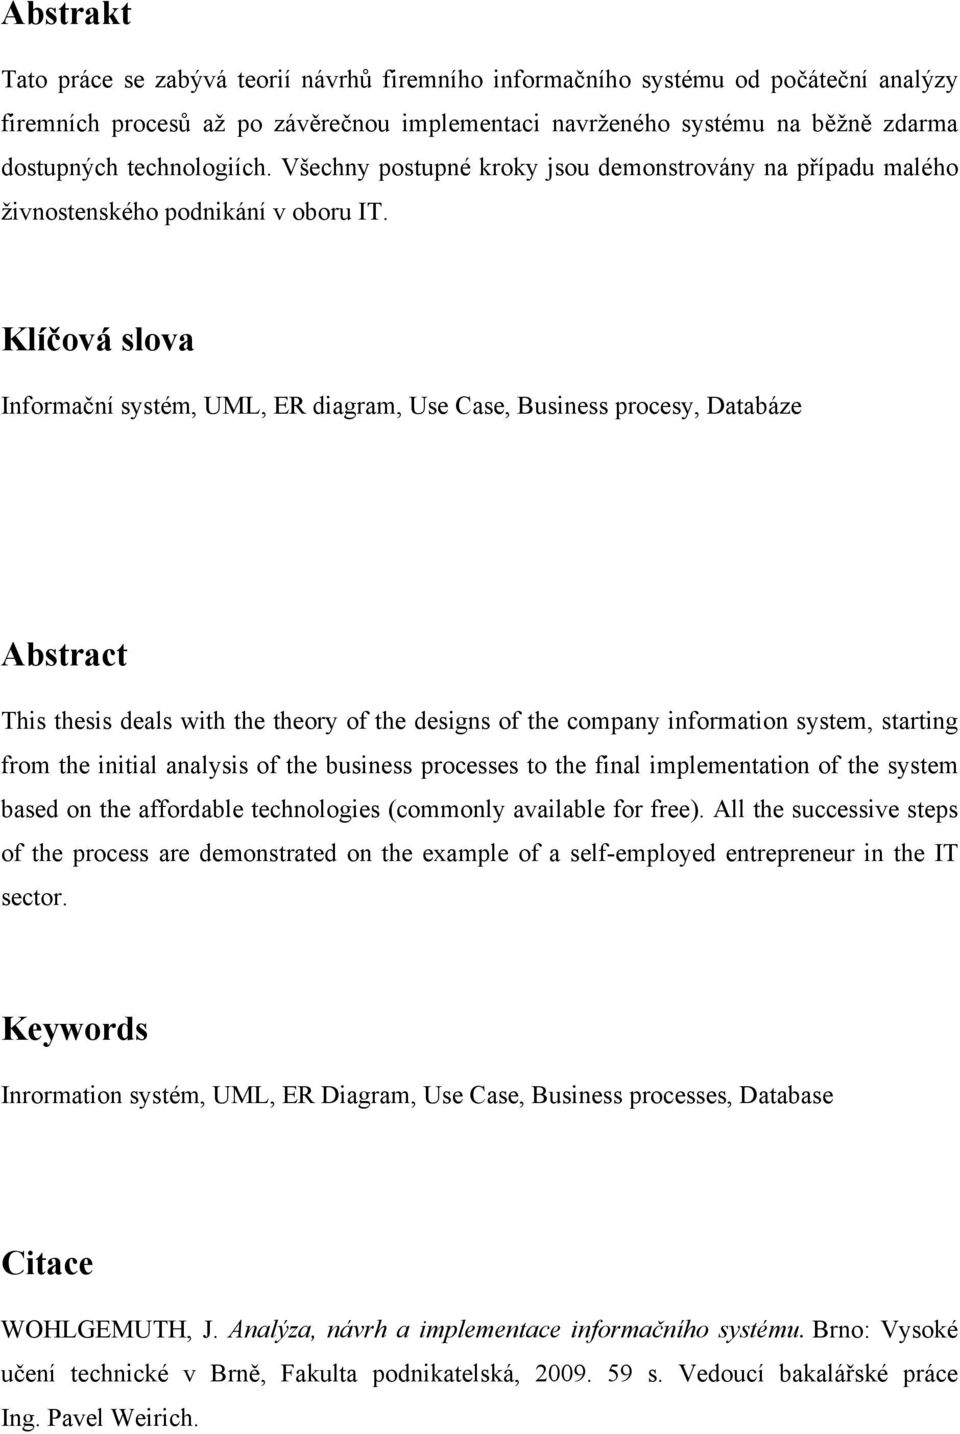 Klíčová slova Informační systém, UML, ER diagram, Use Case, Business procesy, Databáze Abstract This thesis deals with the theory of the designs of the company information system, starting from the